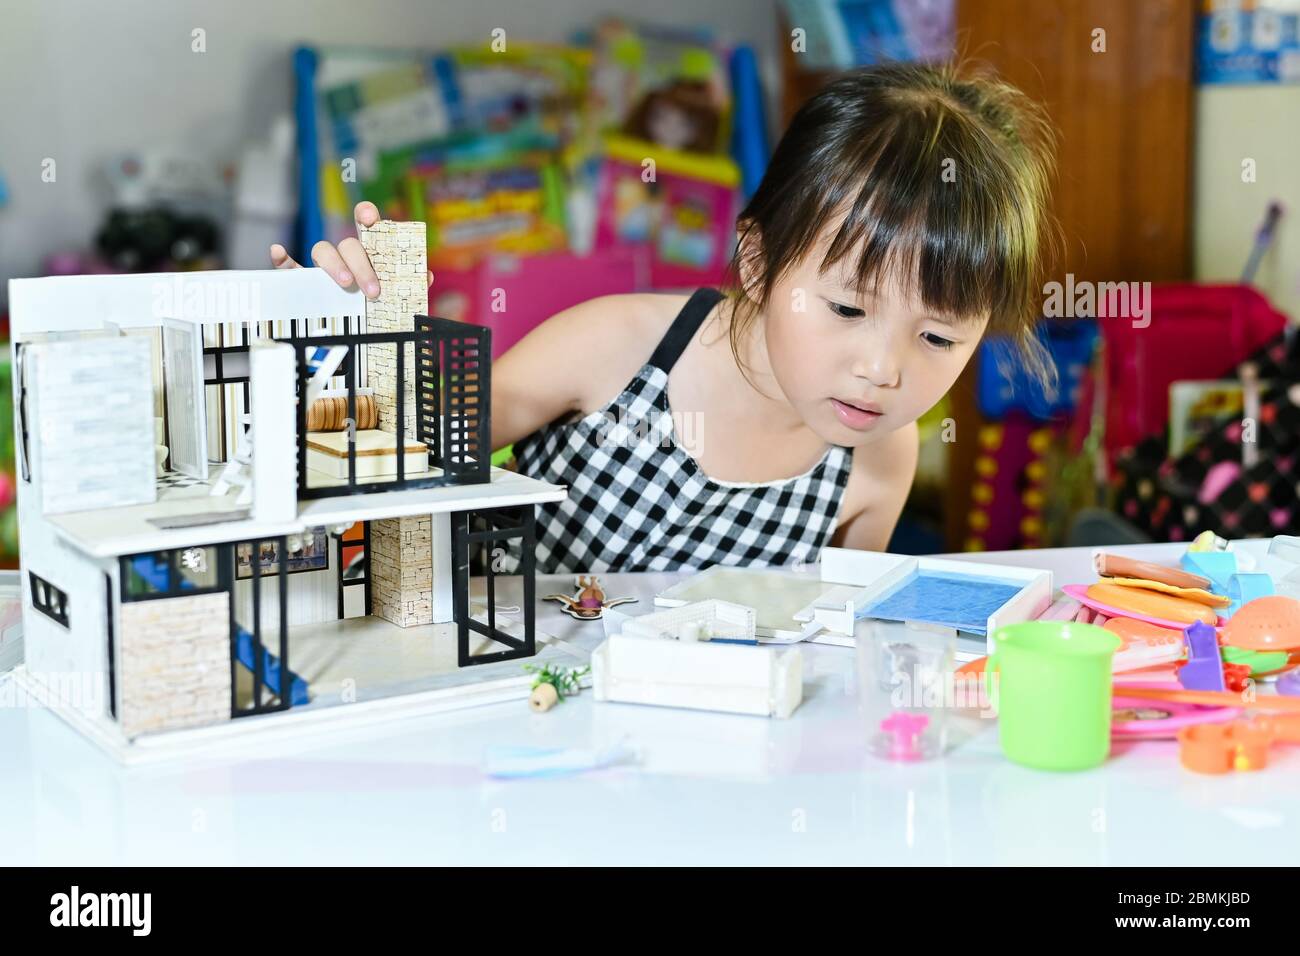 Asian little girl children playing at toy and leaning to enjoy the saturday morning at toy corner home building Stock Photo